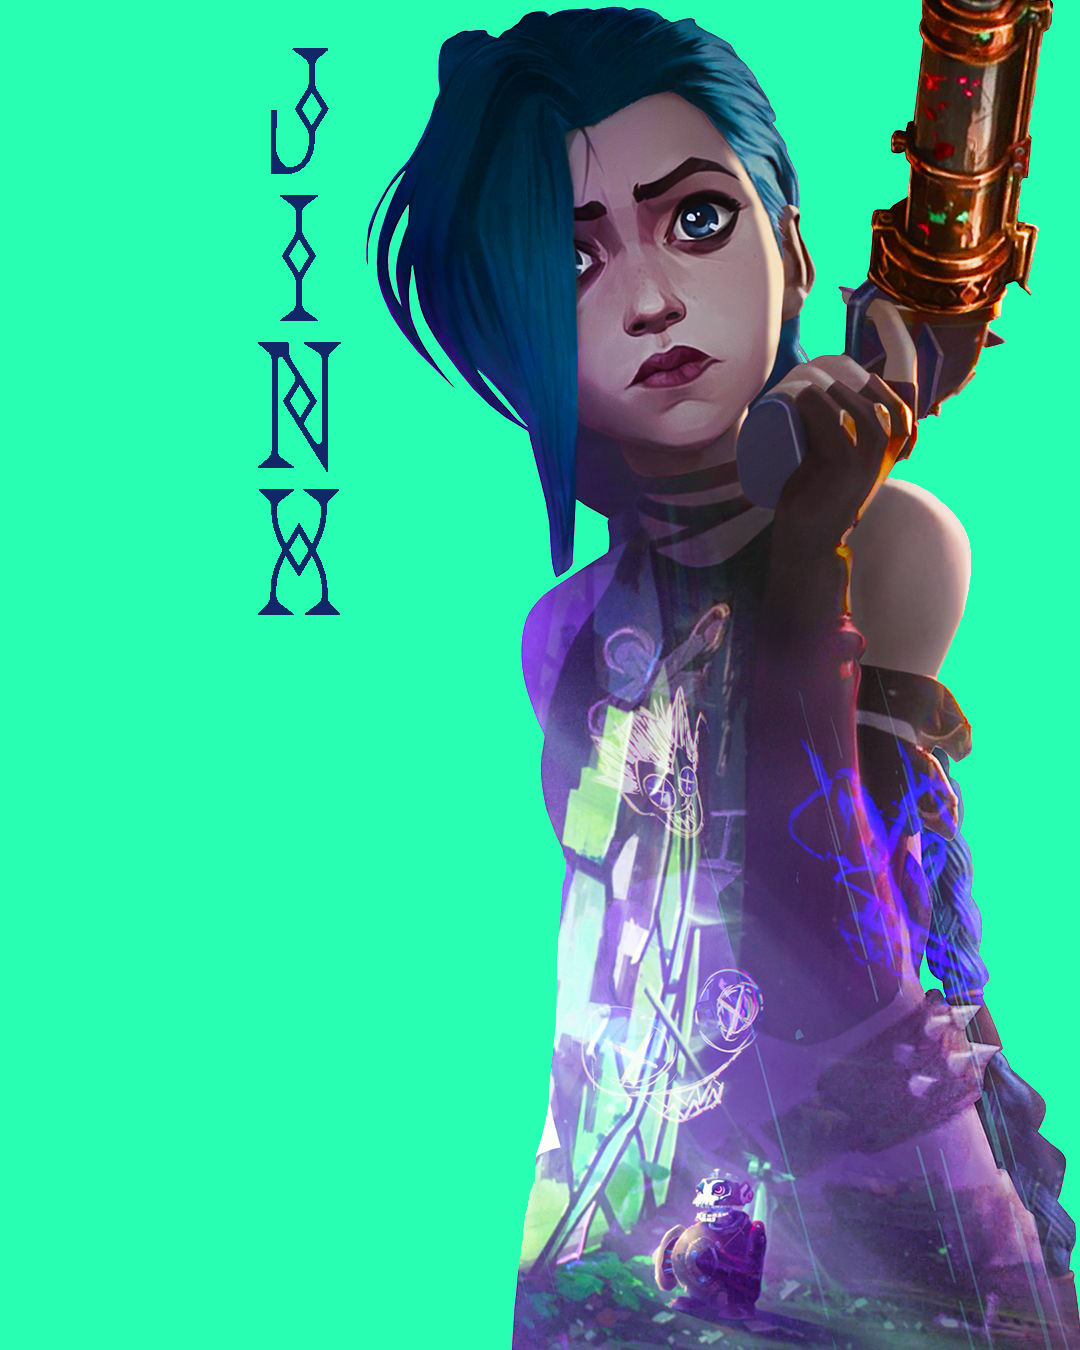 A quick Jinx wallpaper I made from the Arcane poster